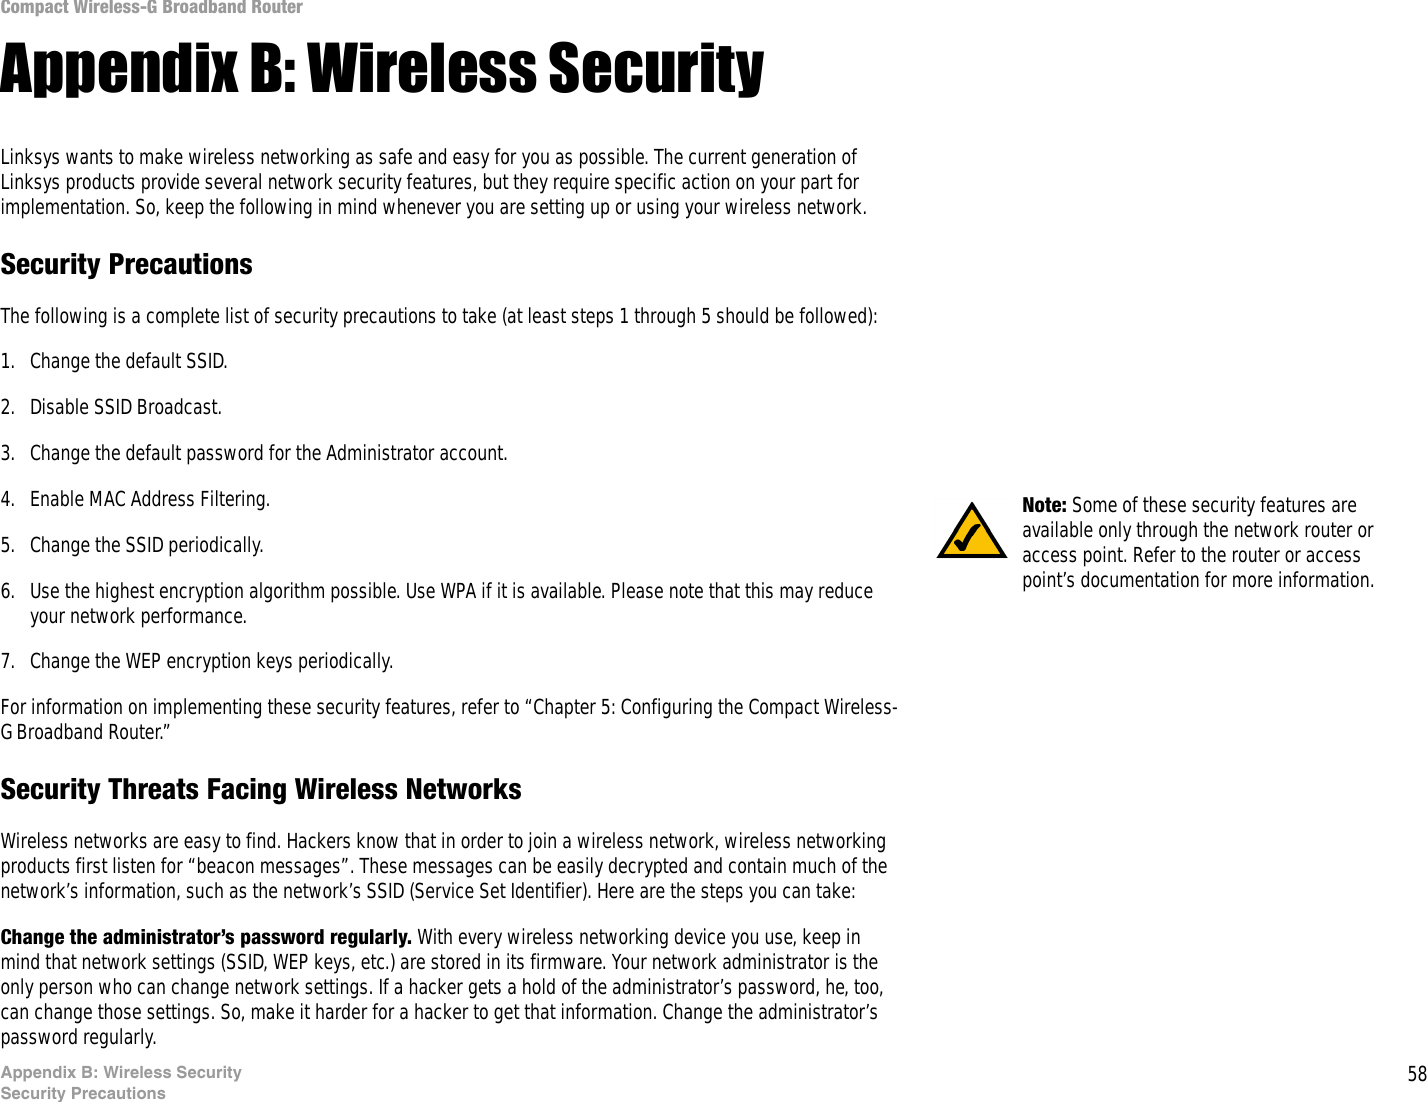 58Appendix B: Wireless SecuritySecurity PrecautionsCompact Wireless-G Broadband RouterAppendix B: Wireless SecurityLinksys wants to make wireless networking as safe and easy for you as possible. The current generation of Linksys products provide several network security features, but they require specific action on your part for implementation. So, keep the following in mind whenever you are setting up or using your wireless network.Security PrecautionsThe following is a complete list of security precautions to take (at least steps 1 through 5 should be followed):1. Change the default SSID. 2. Disable SSID Broadcast. 3. Change the default password for the Administrator account. 4. Enable MAC Address Filtering. 5. Change the SSID periodically. 6. Use the highest encryption algorithm possible. Use WPA if it is available. Please note that this may reduce your network performance. 7. Change the WEP encryption keys periodically. For information on implementing these security features, refer to “Chapter 5: Configuring the Compact Wireless-G Broadband Router.”Security Threats Facing Wireless Networks Wireless networks are easy to find. Hackers know that in order to join a wireless network, wireless networking products first listen for “beacon messages”. These messages can be easily decrypted and contain much of the network’s information, such as the network’s SSID (Service Set Identifier). Here are the steps you can take:Change the administrator’s password regularly. With every wireless networking device you use, keep in mind that network settings (SSID, WEP keys, etc.) are stored in its firmware. Your network administrator is the only person who can change network settings. If a hacker gets a hold of the administrator’s password, he, too, can change those settings. So, make it harder for a hacker to get that information. Change the administrator’s password regularly.Note: Some of these security features are available only through the network router or access point. Refer to the router or access point’s documentation for more information.